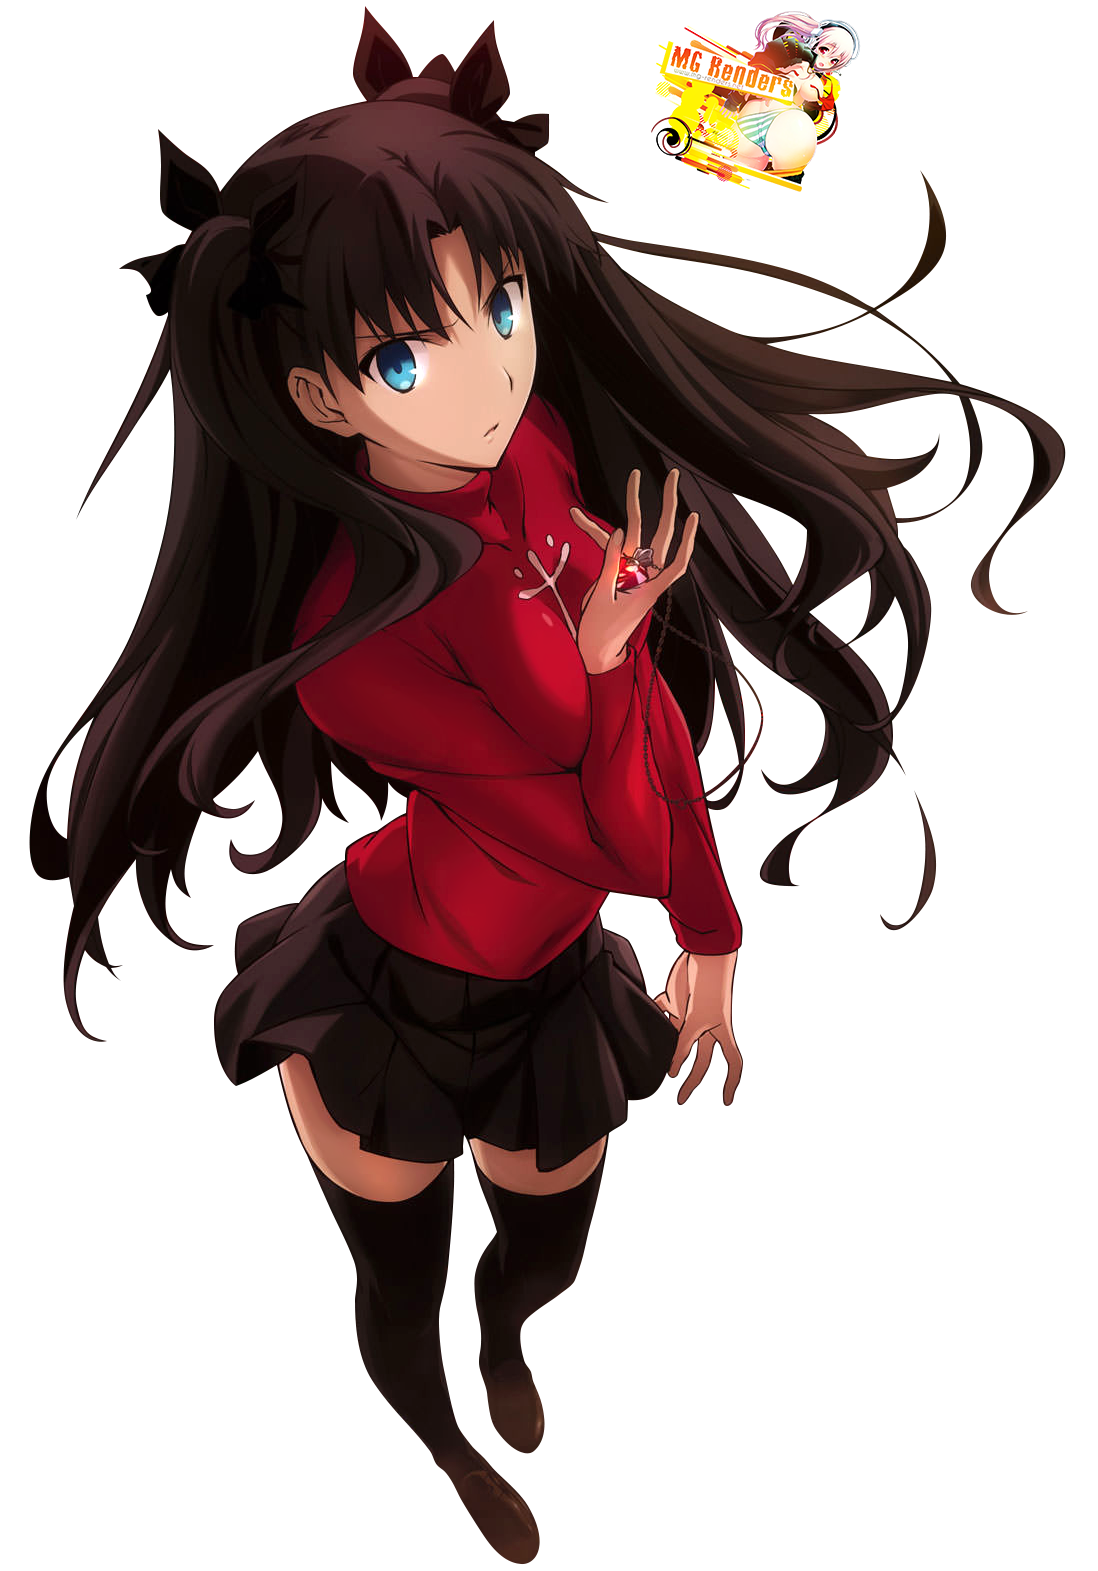 Fate stay night - Tohsaka Rin Render 9 - Anime - PNG Image without